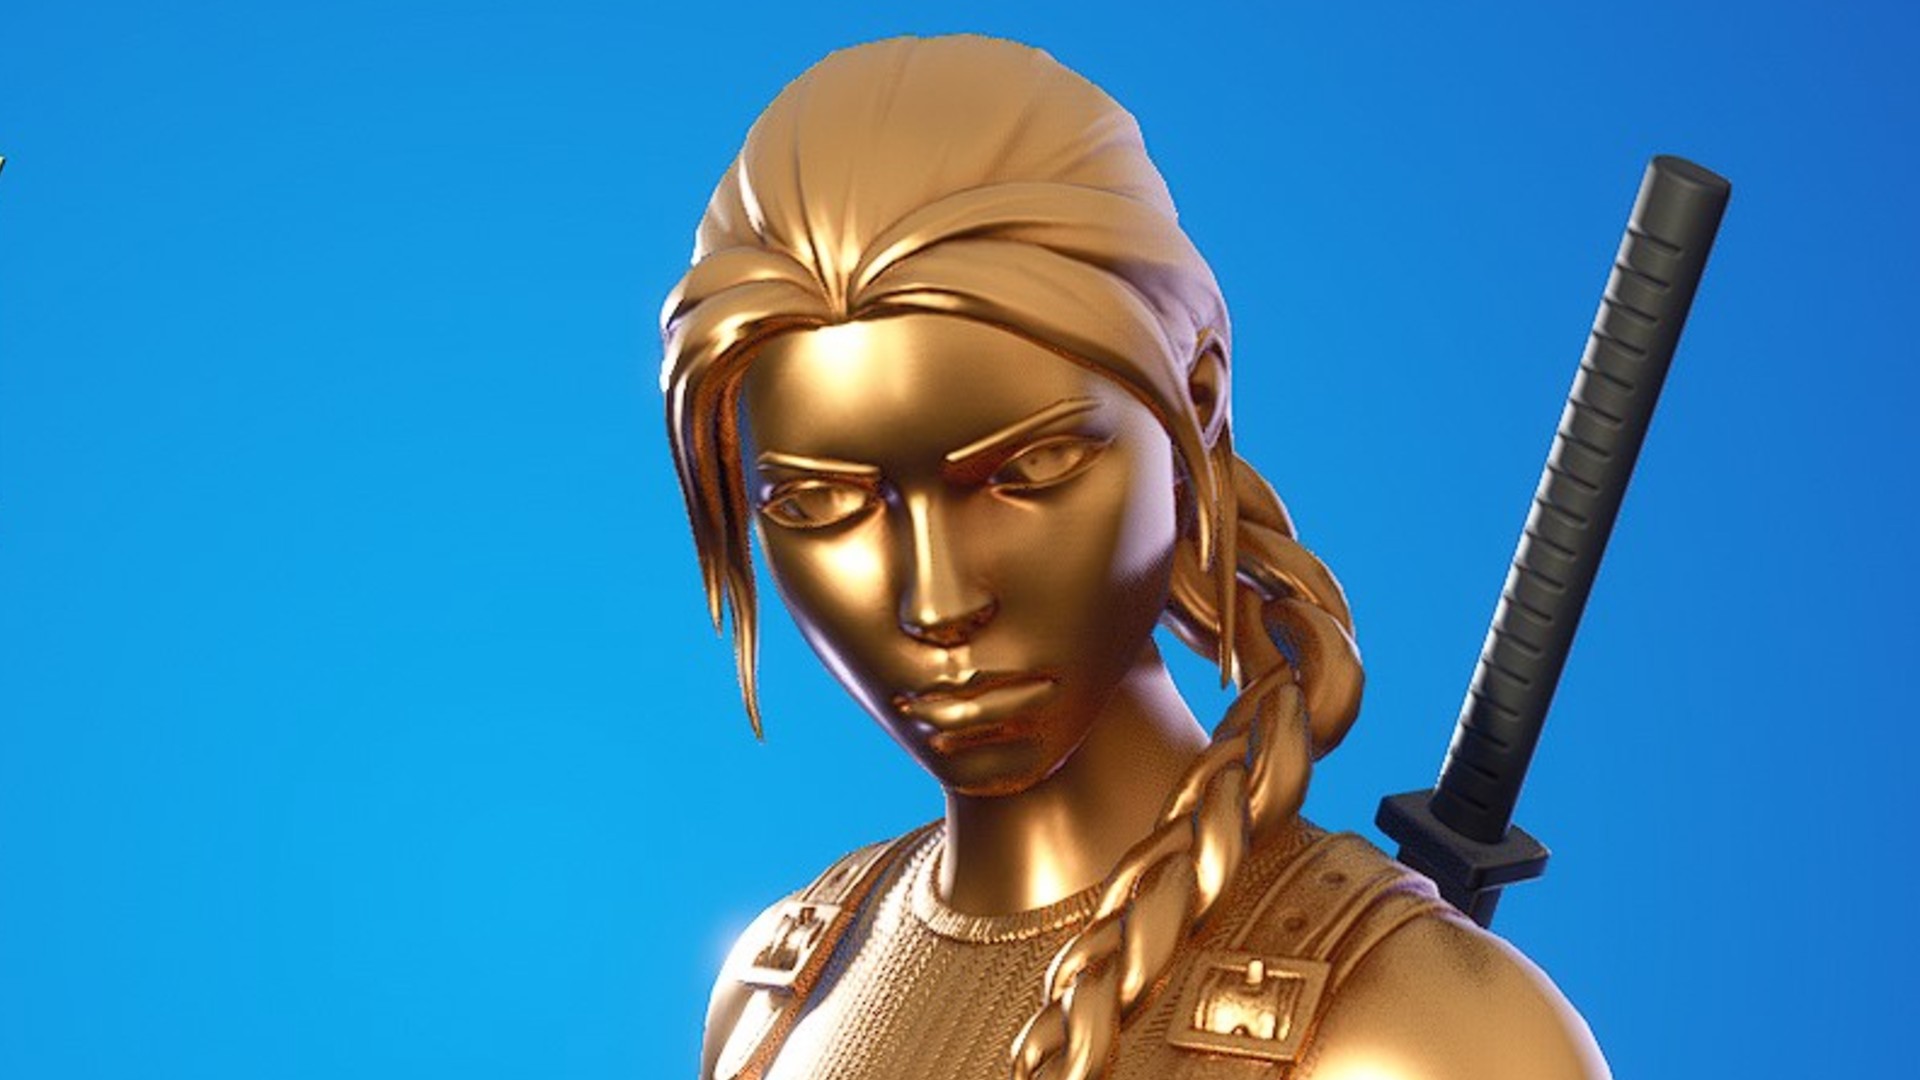 How To Get The Gold Lara Croft In Fortnite How To Get Gold Lara Croft In Fortnite Pc Gamer